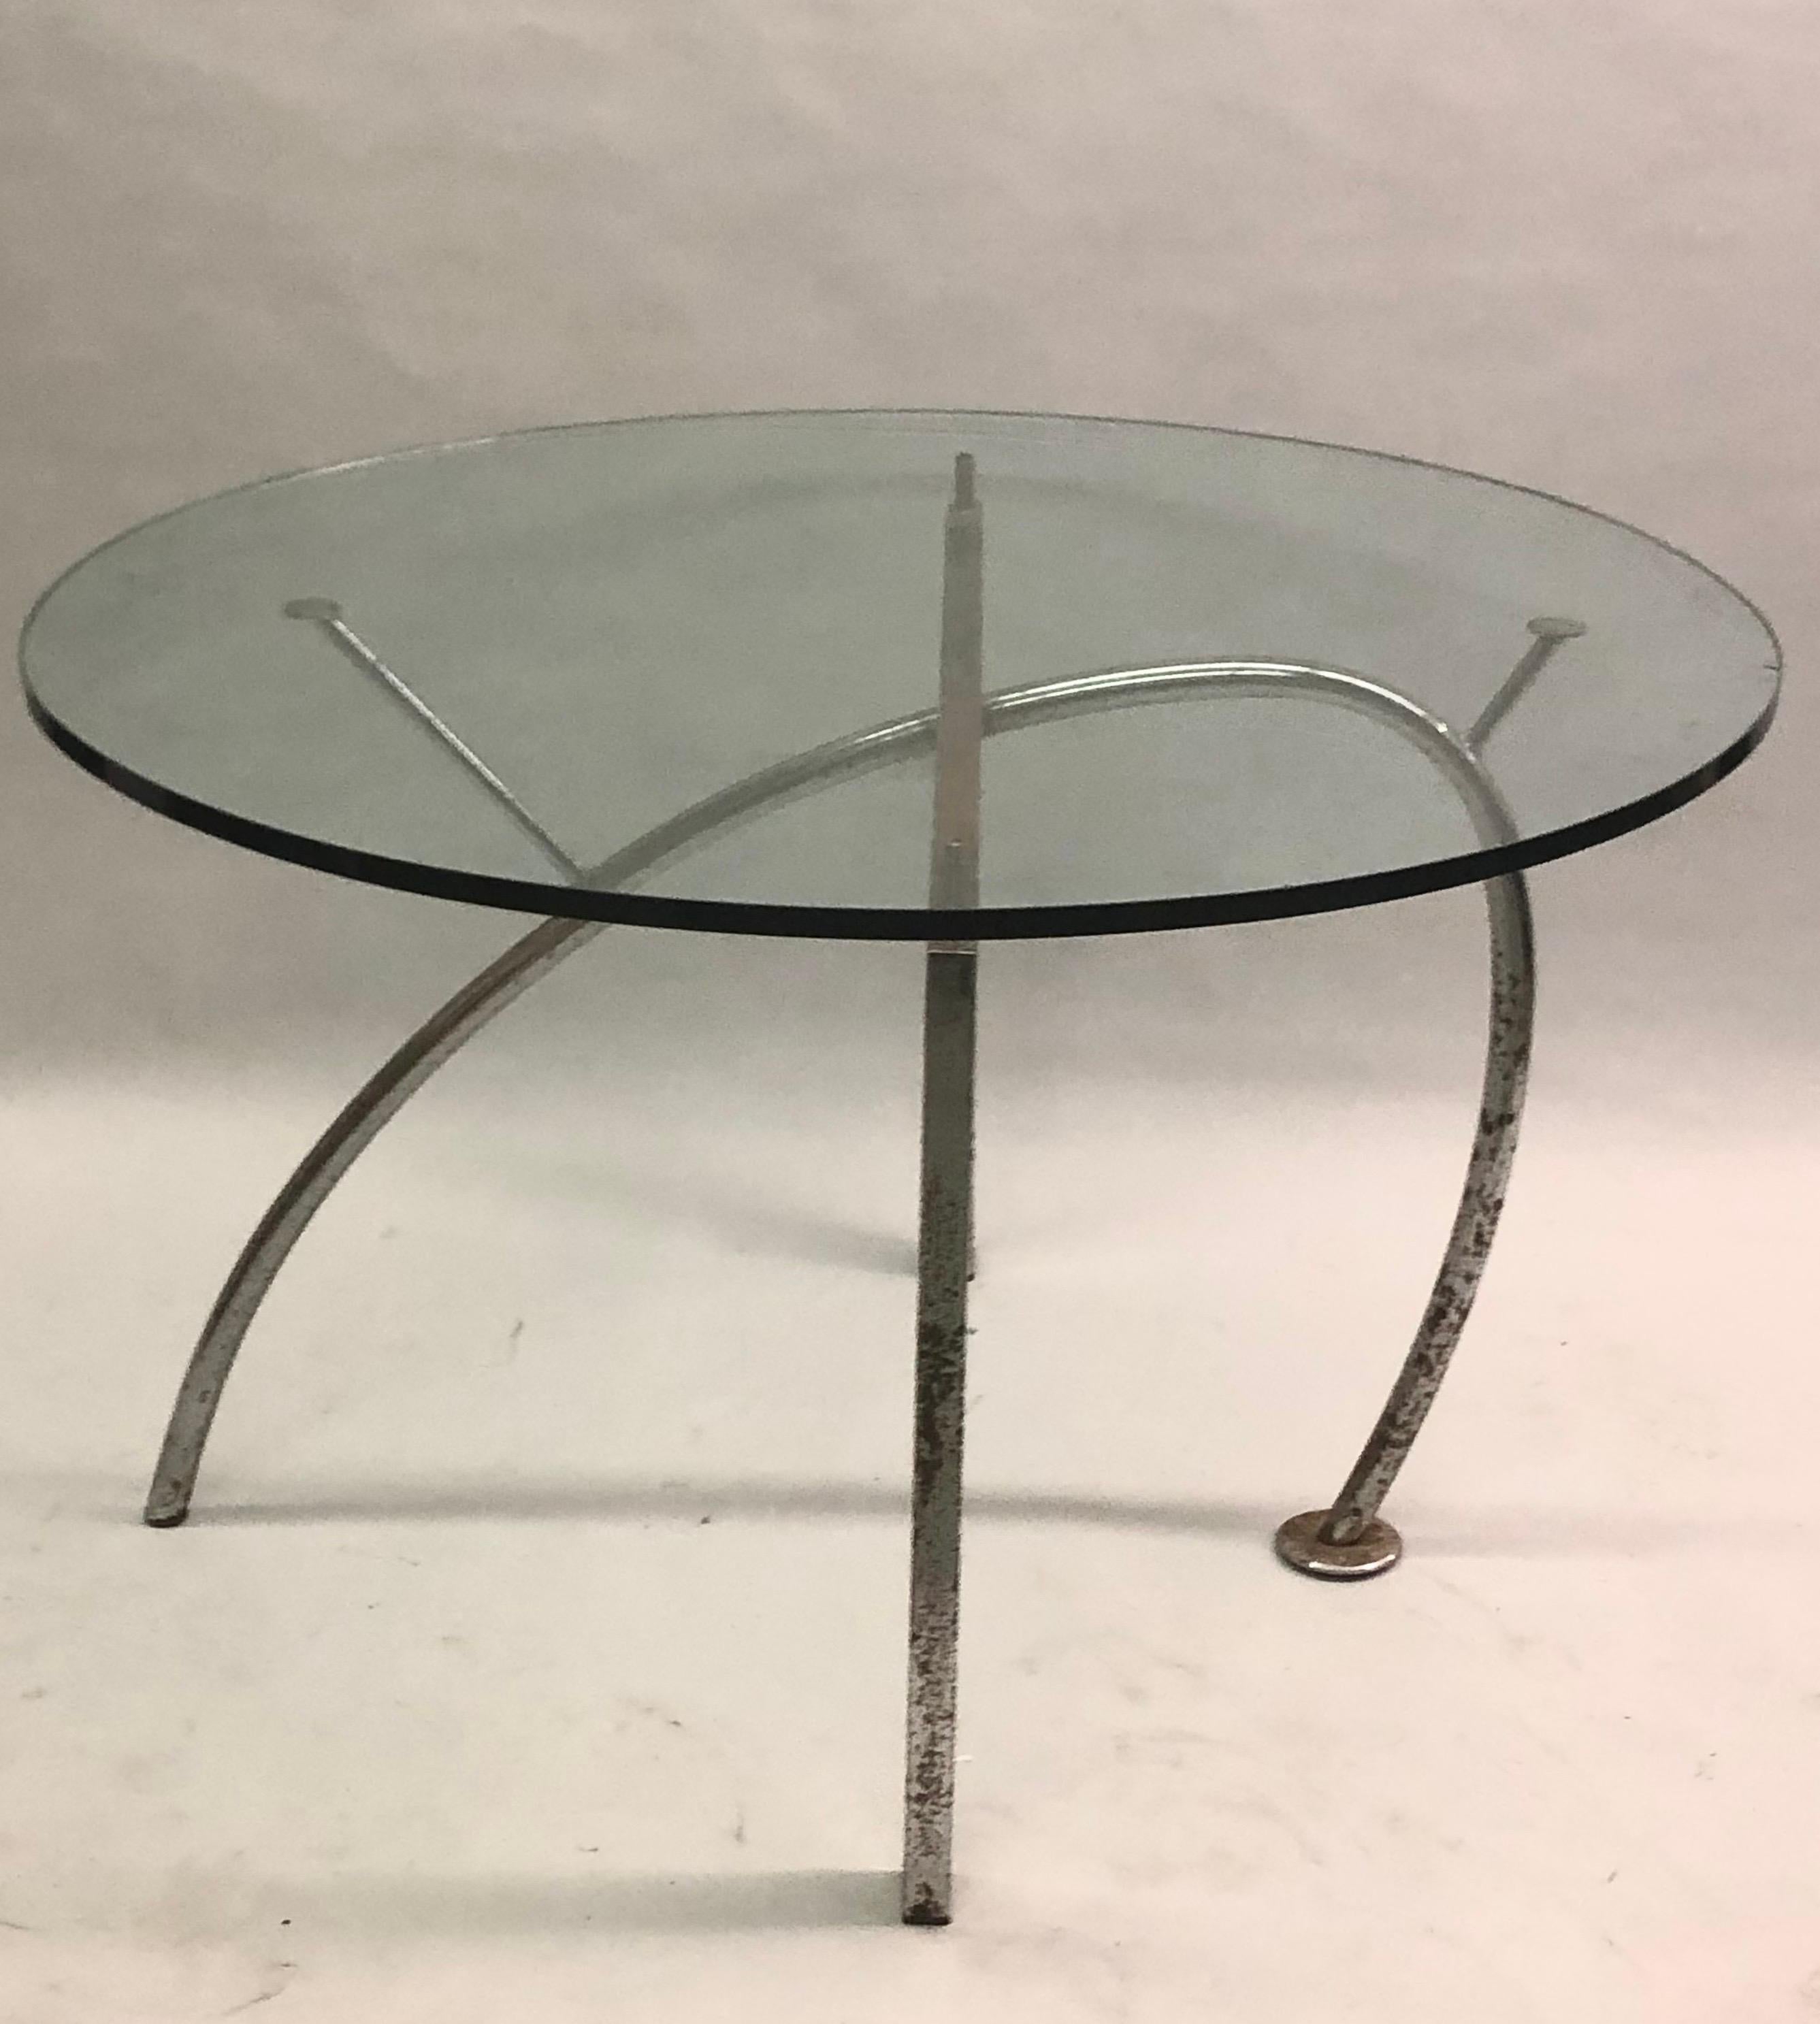 Italian Post Modern Round Dining Table Prototype by Massimo Iosa Ghini In Distressed Condition For Sale In New York, NY